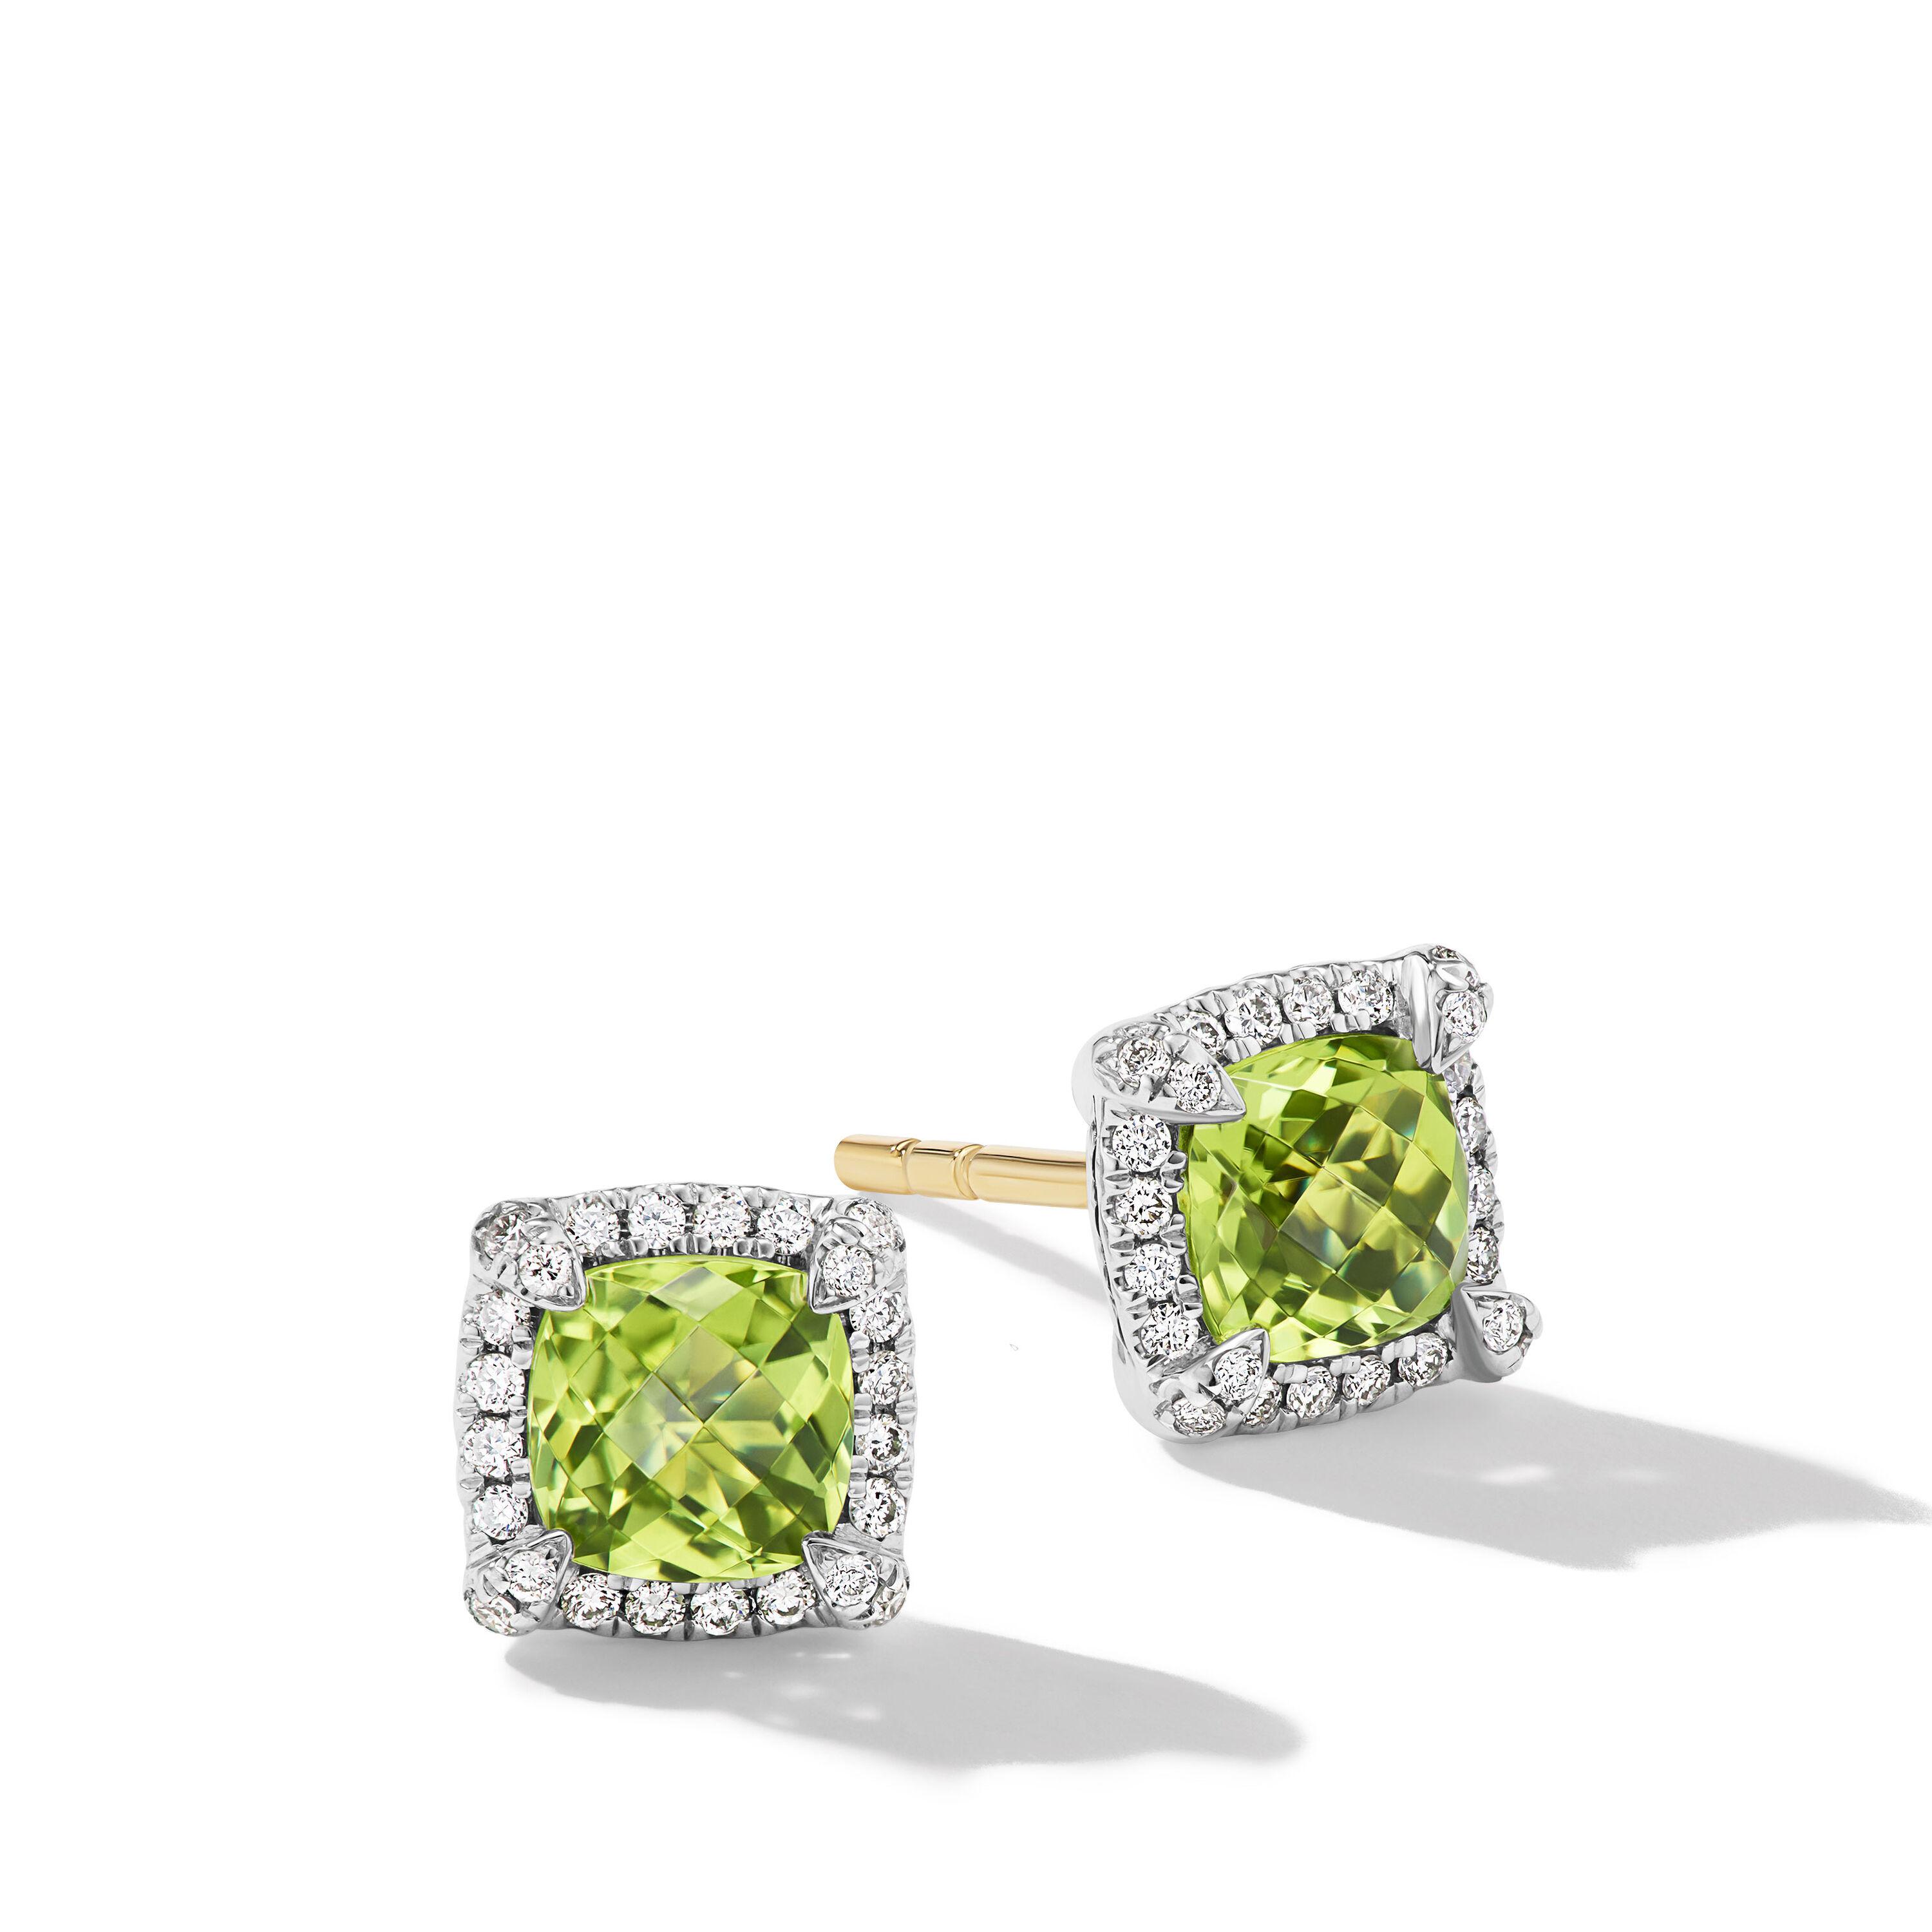 David Yurman Petite Chatelaine Pave Bezel Stud Earrings in Sterling Silver with Peridot and Diamonds